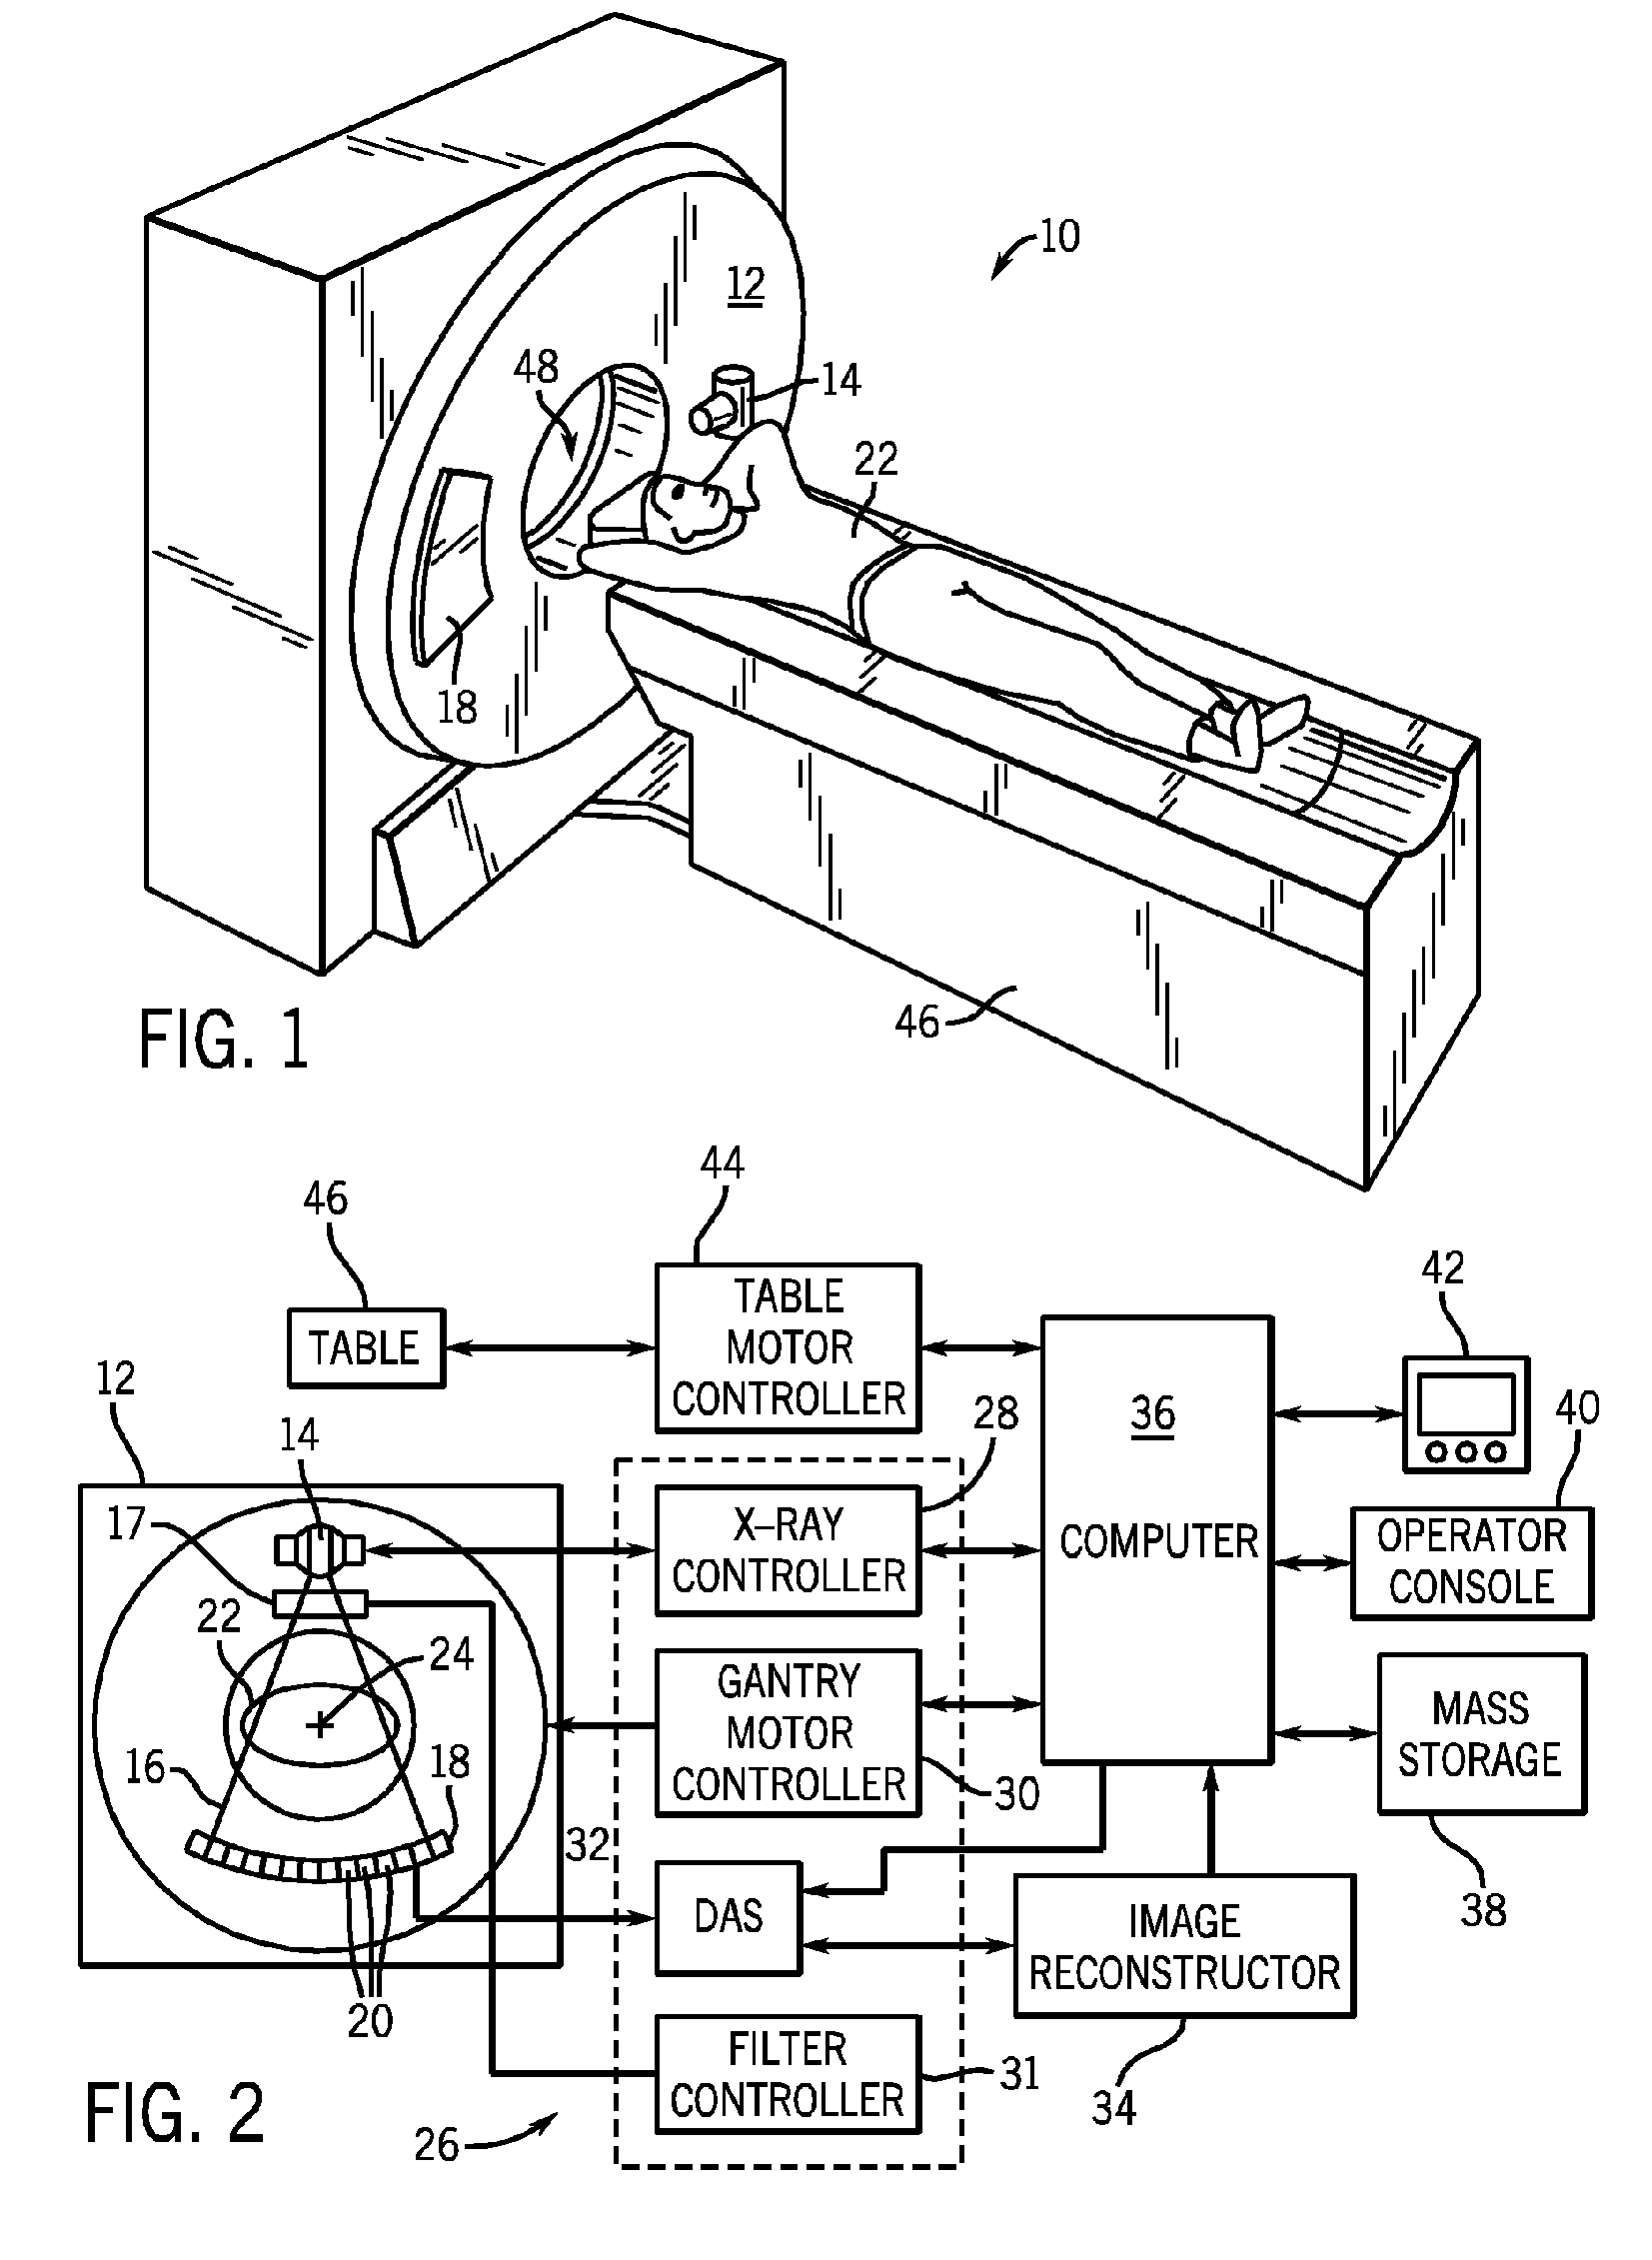 X-ray flux management device